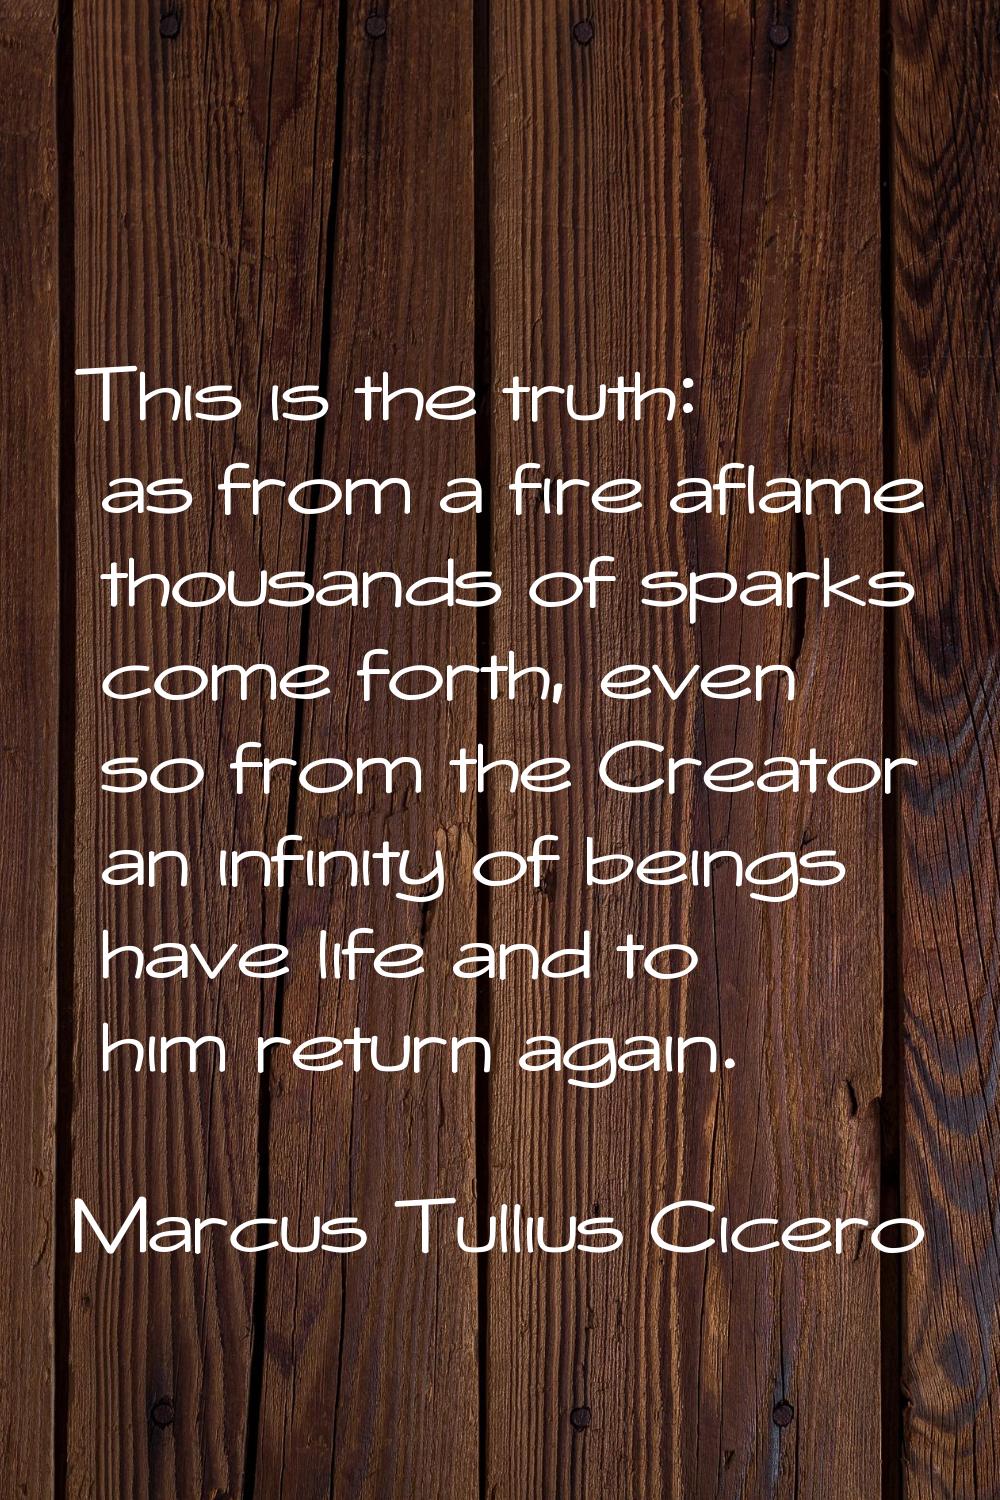 This is the truth: as from a fire aflame thousands of sparks come forth, even so from the Creator a